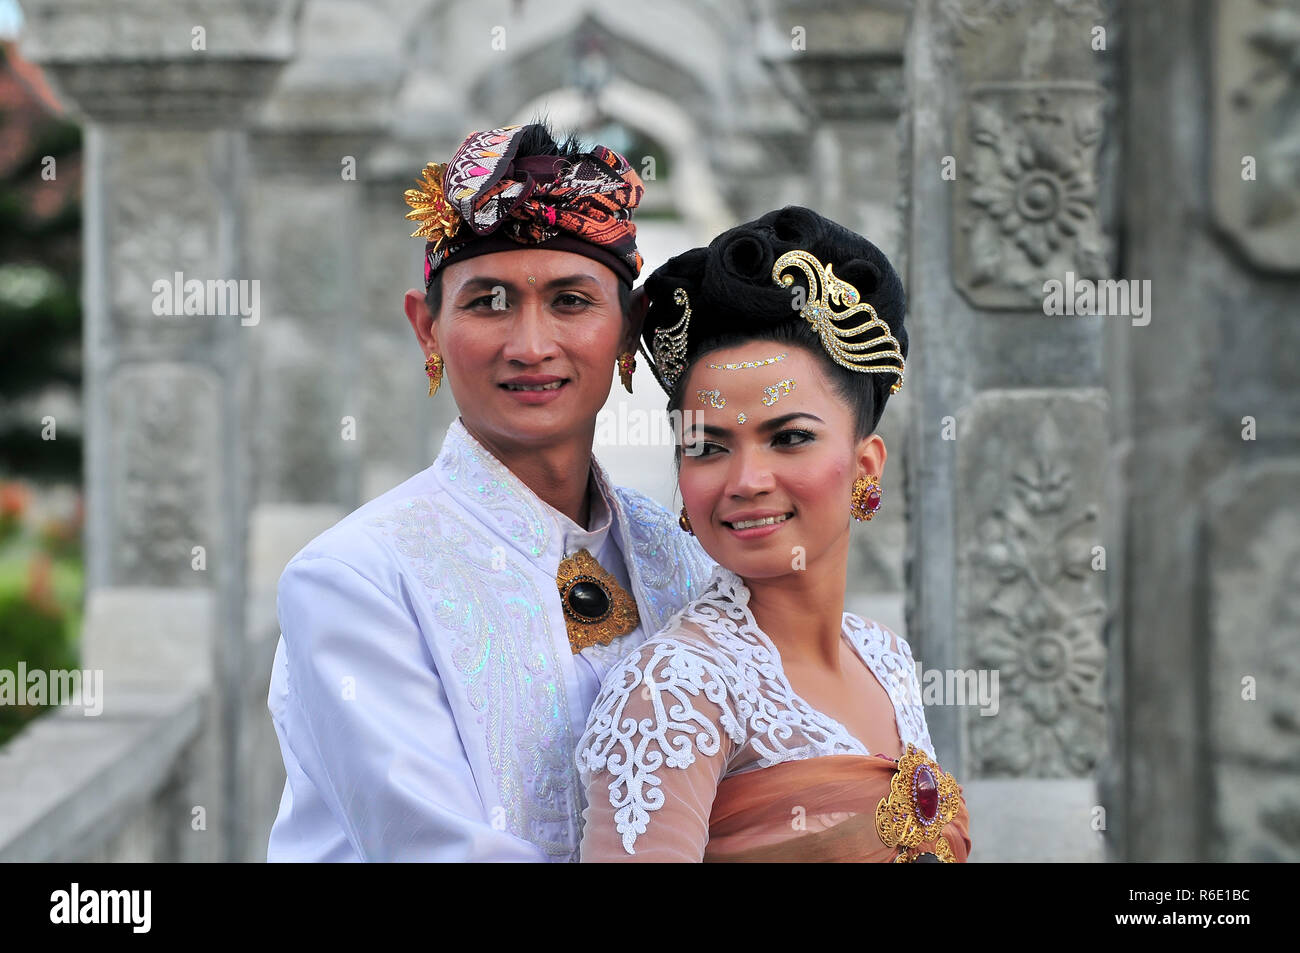 Performers Enacting Wedding Scene In Preparation For Religious Ceremony In Tirtagangga Taman Ujung Water Palace Bali, Indonesia Stock Photo